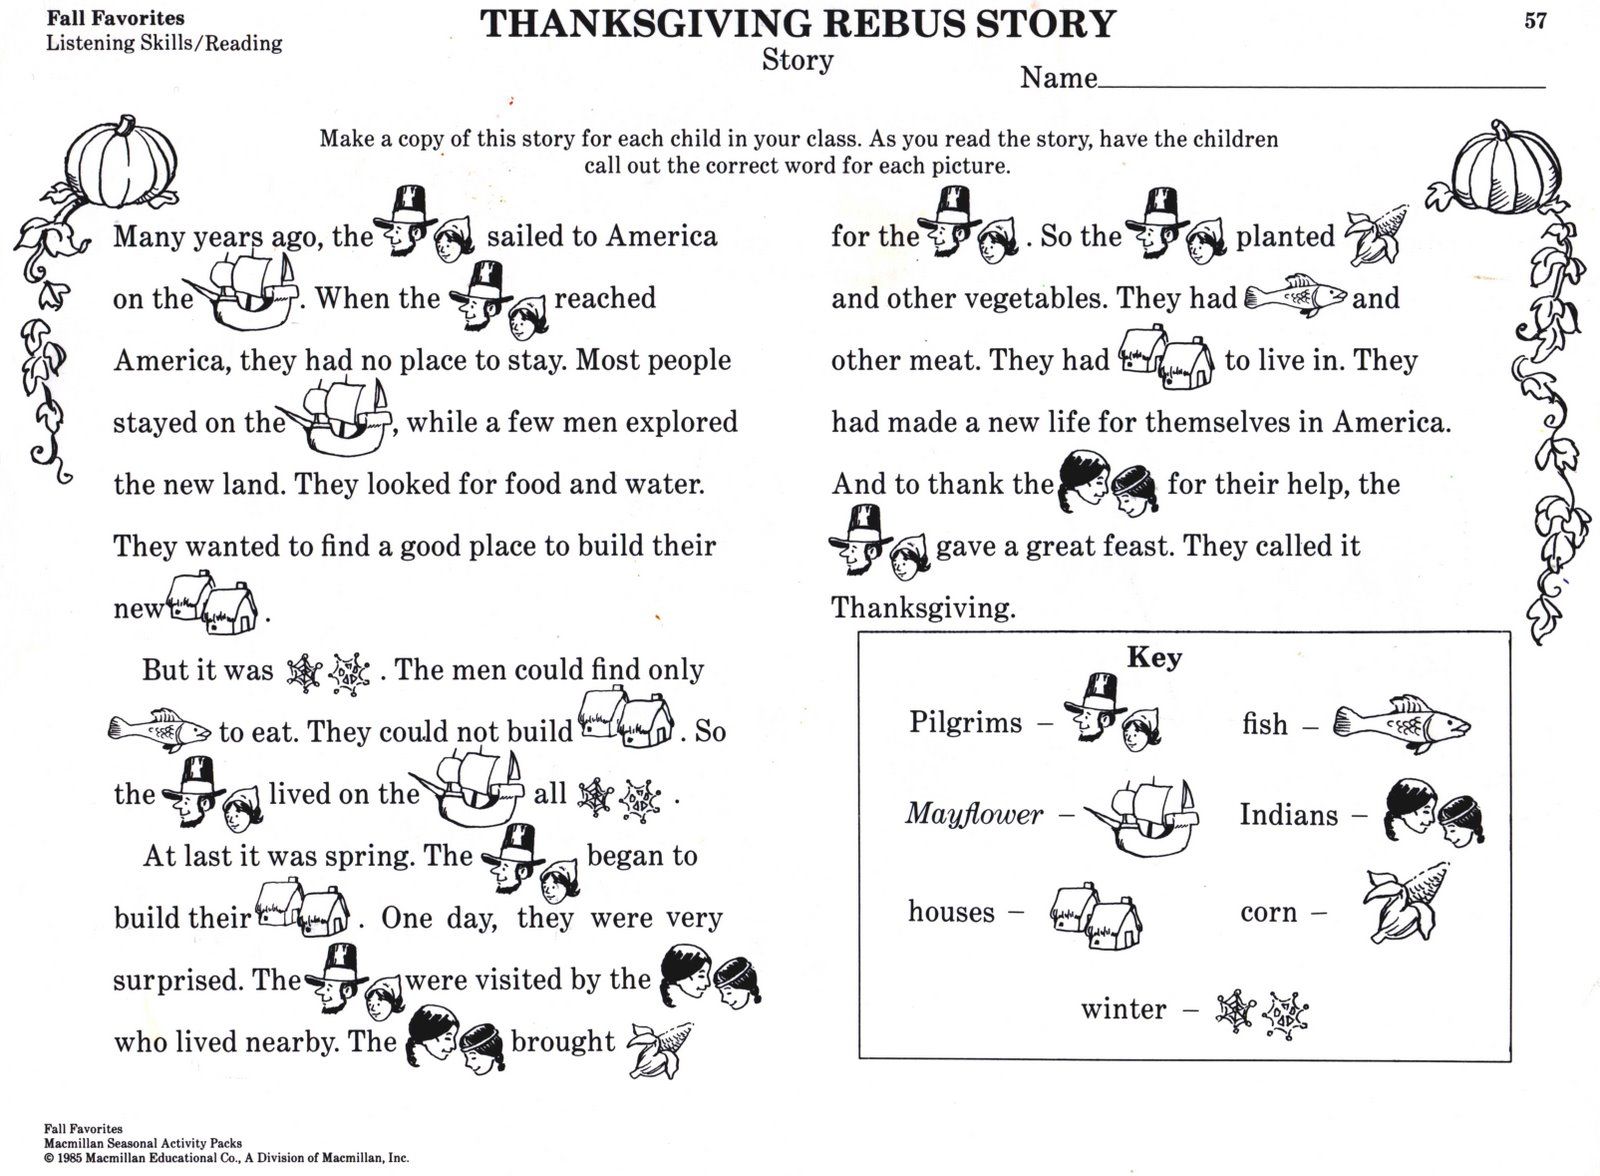 Thanksgiving Rebus Story  Simple Explanation Of Thanksgiving  Copy